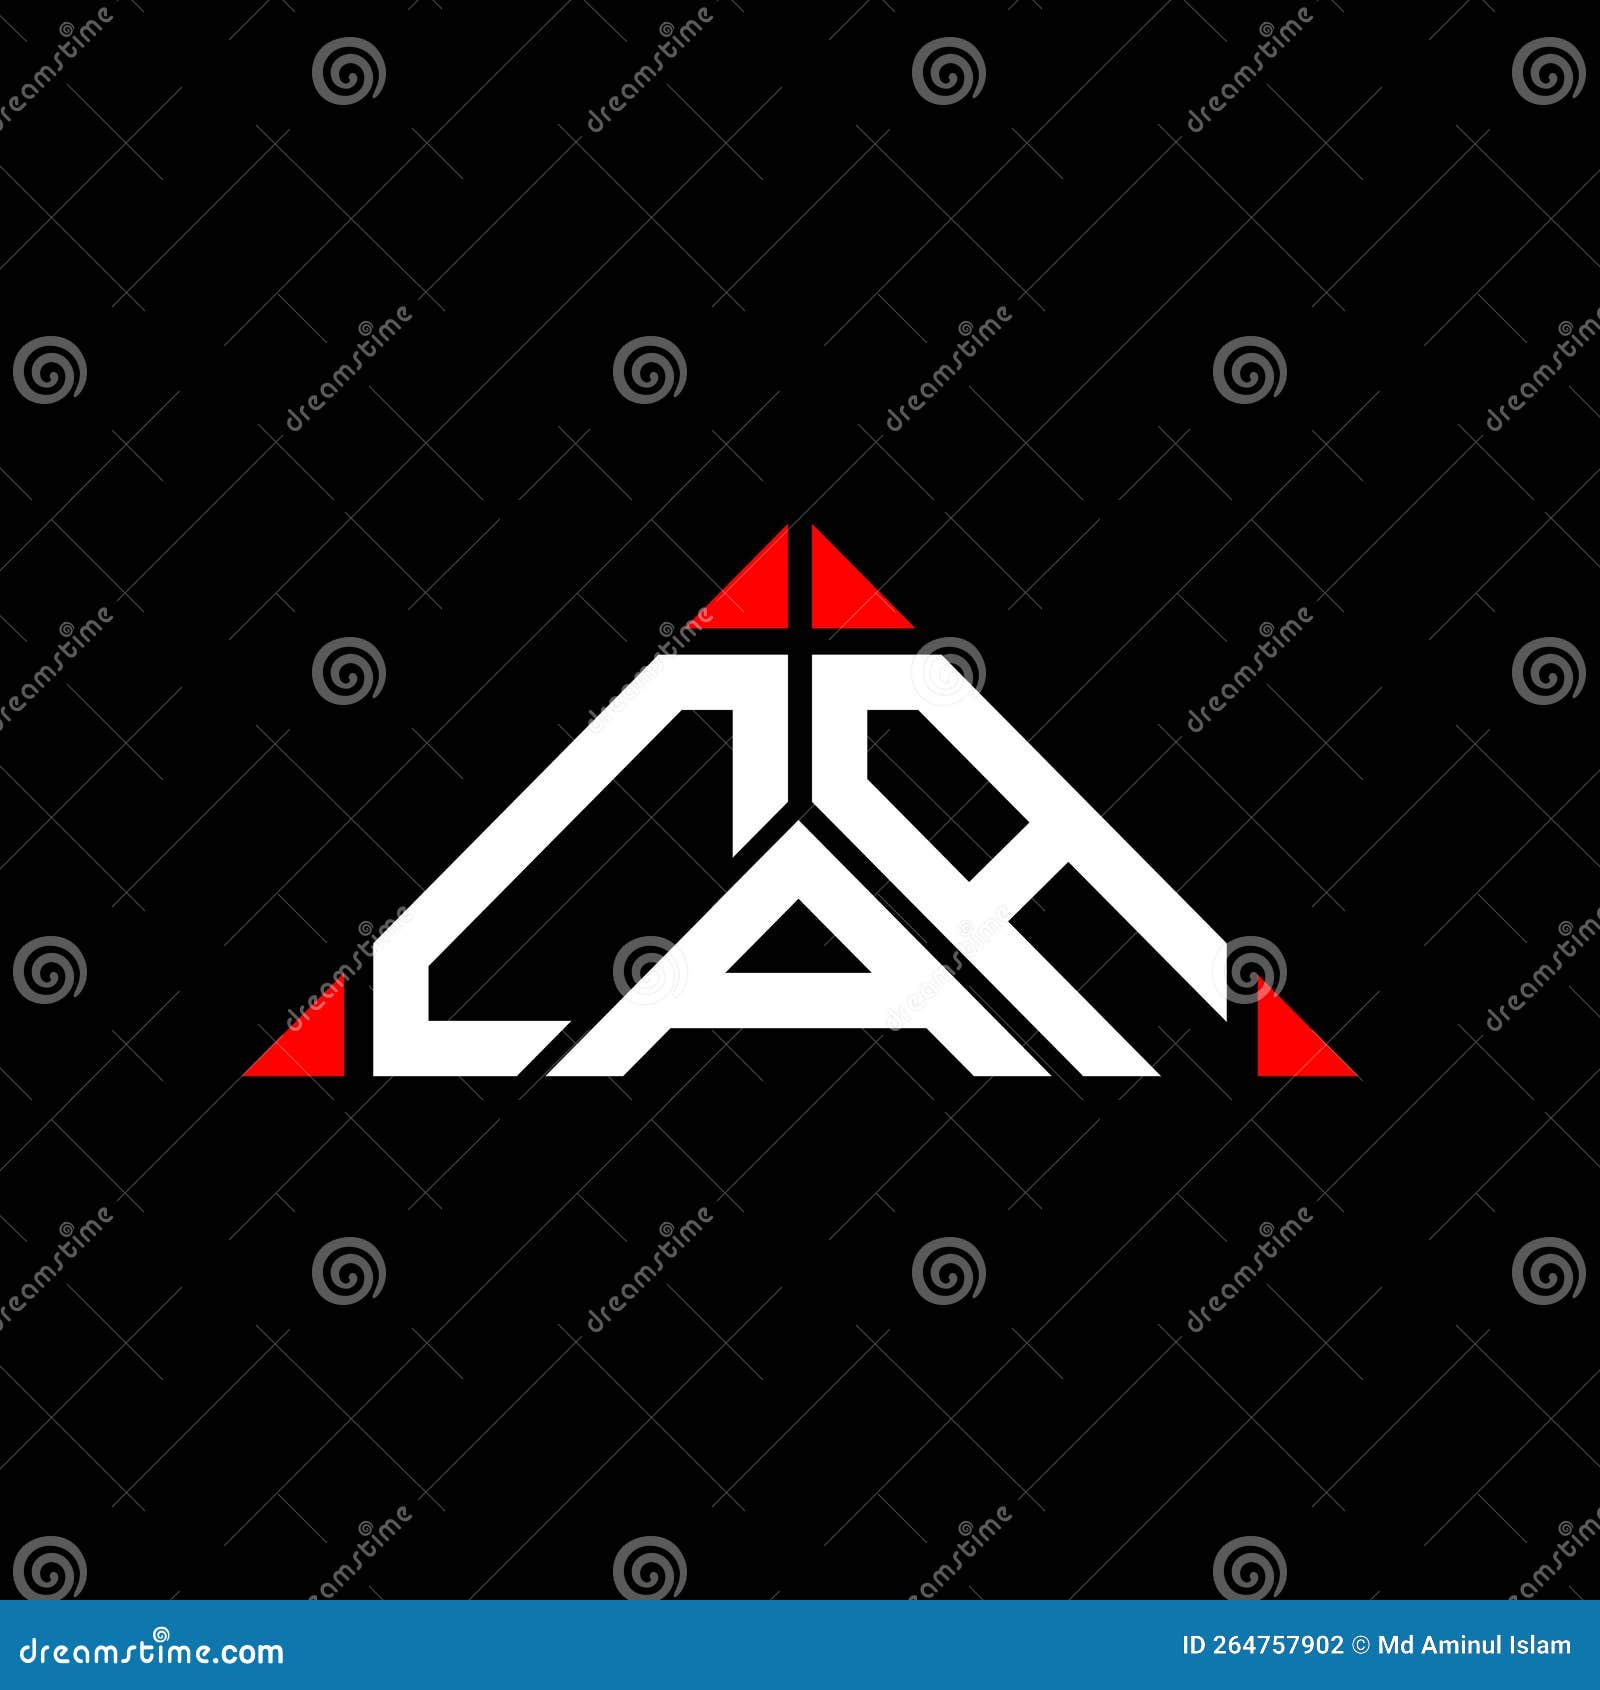 caa letter logo creative  with  graphic,